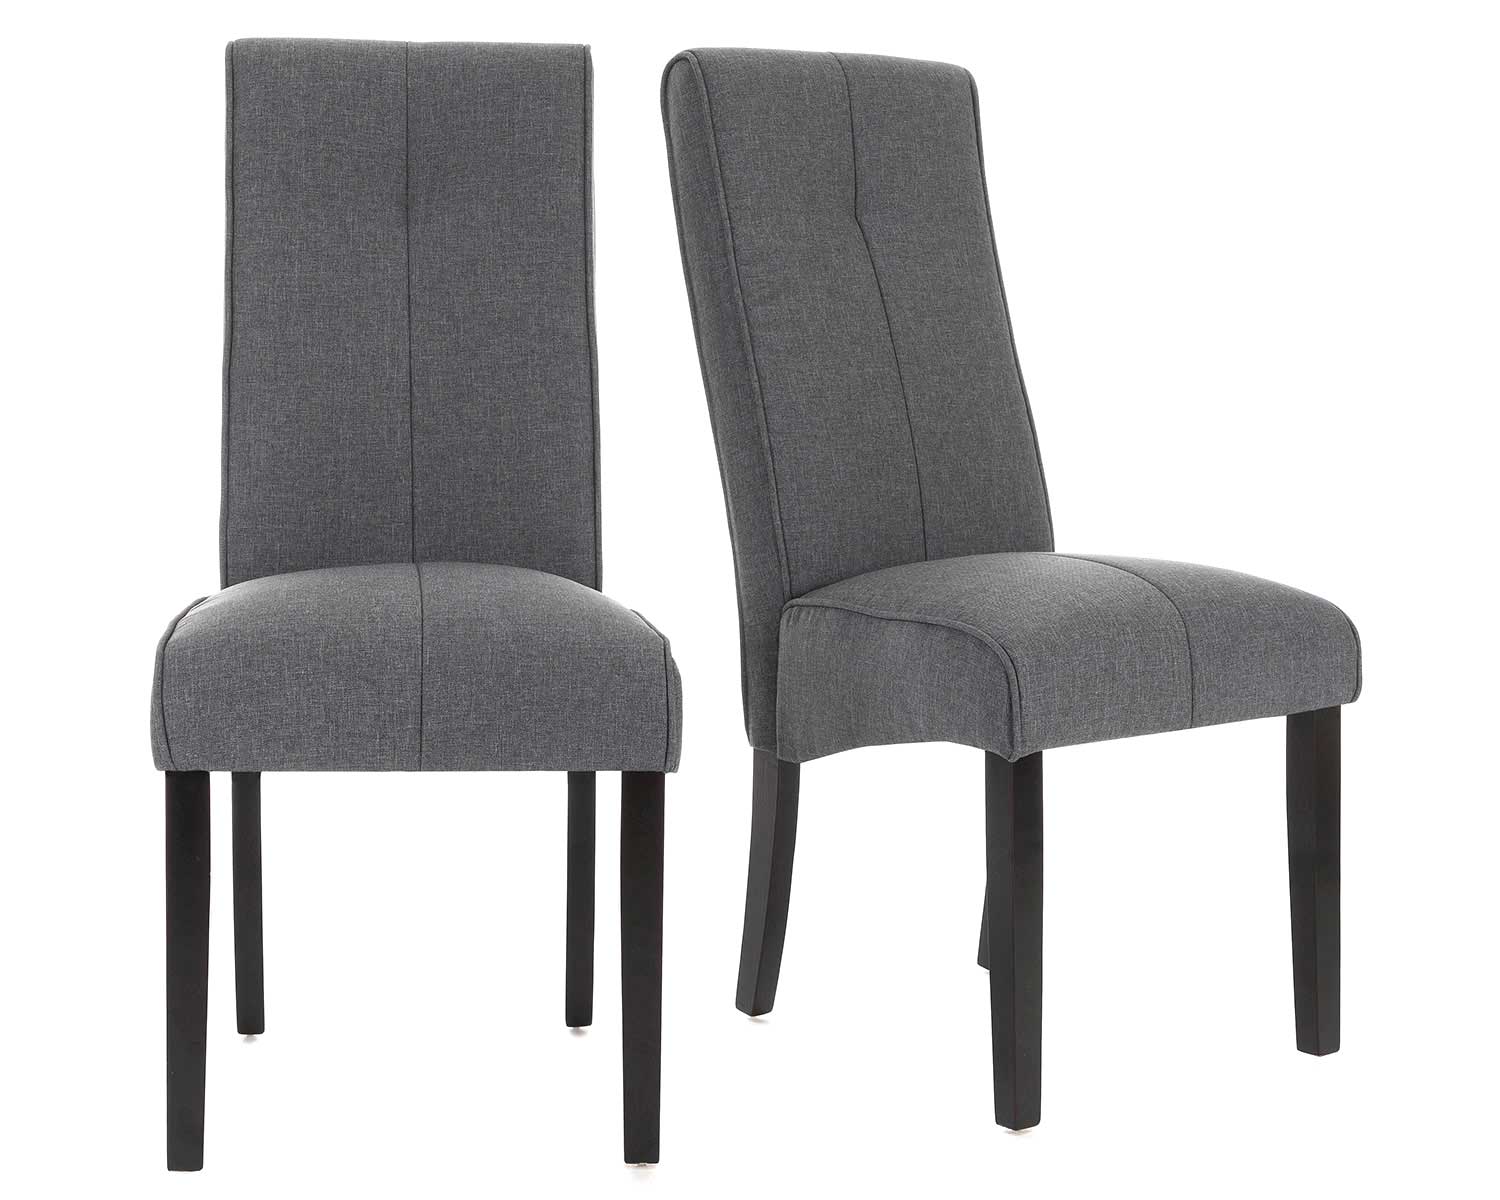 x2 Vienna Grey Linen Dining Chair with Oak Legs Luxury Upholstered